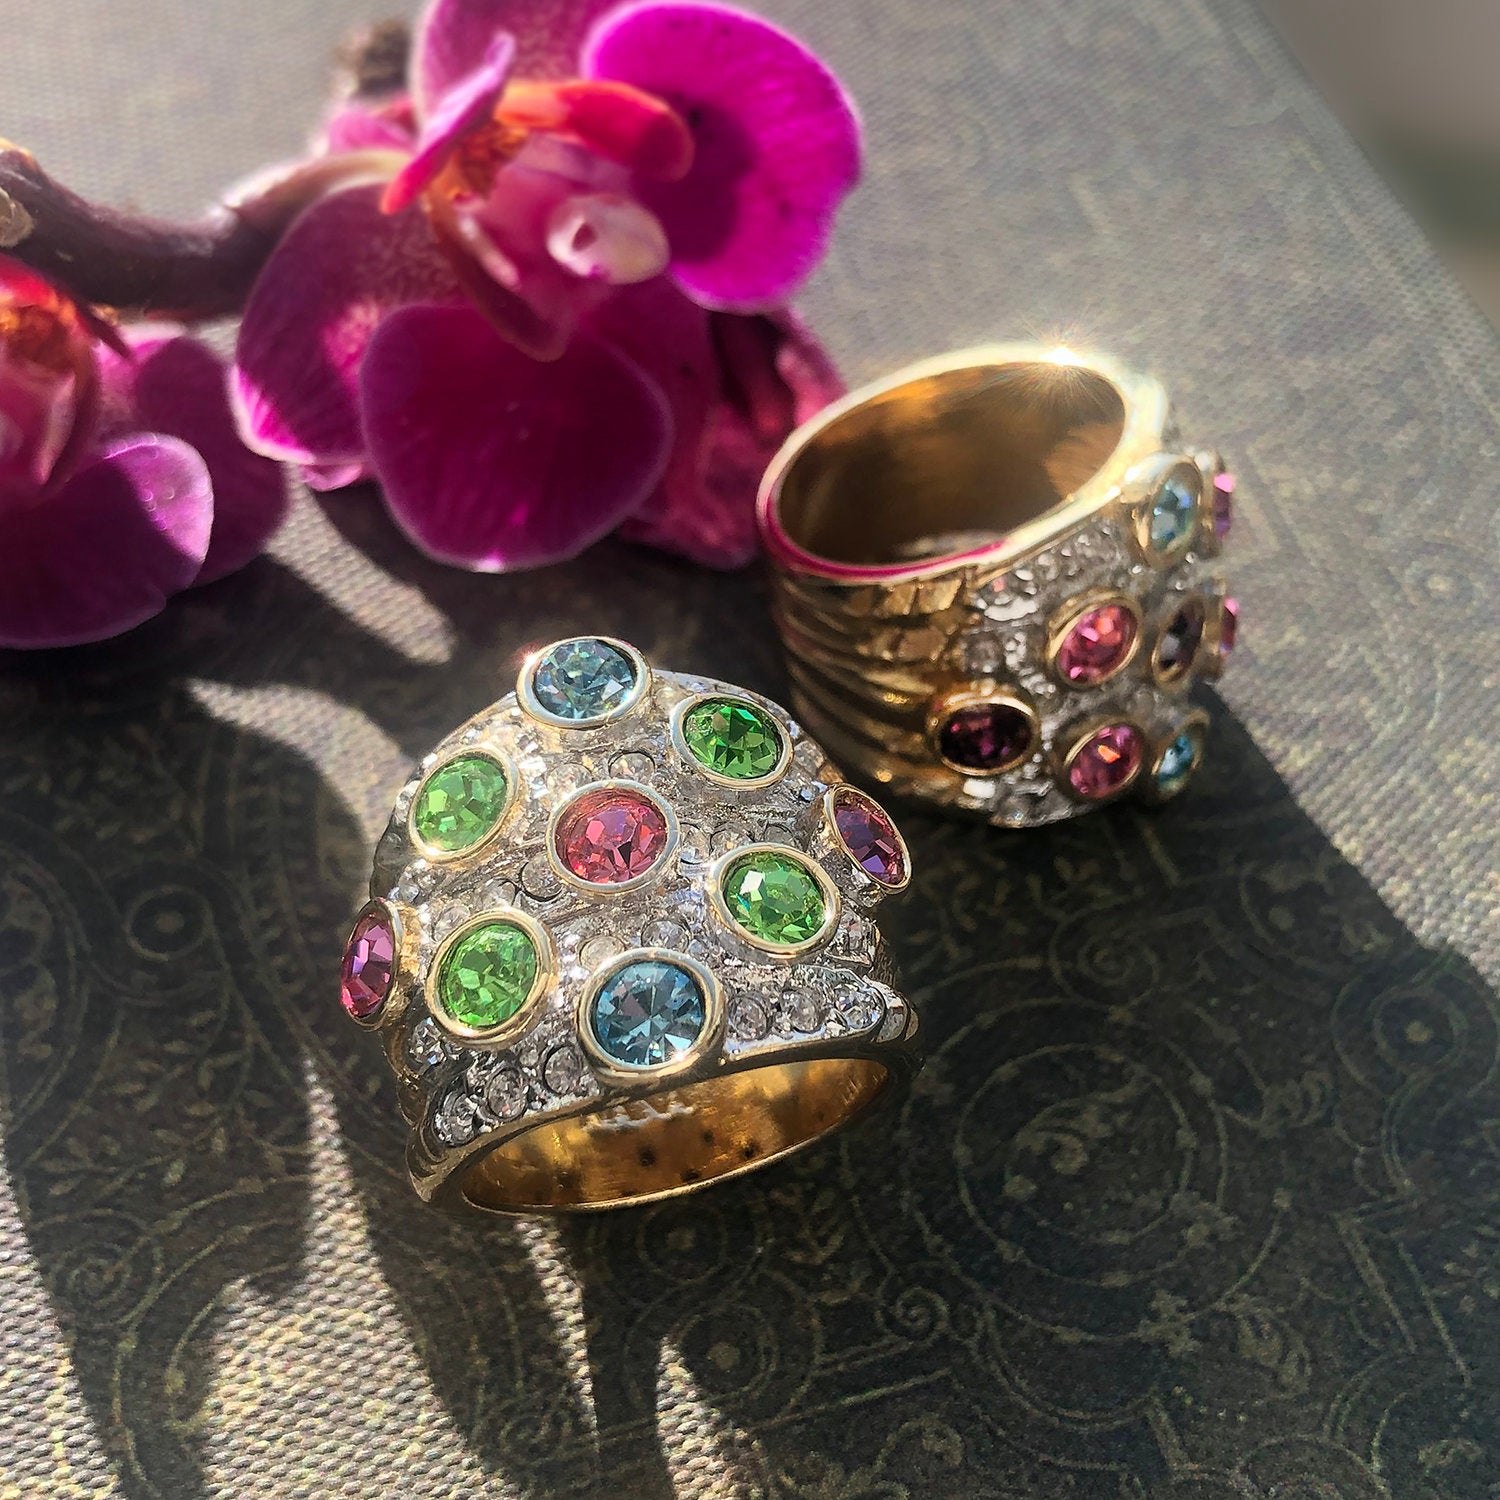 vintage-pave-pastel-multicolored-crystals-clear-Austrian-crystal-ring-yellow-gold-plated